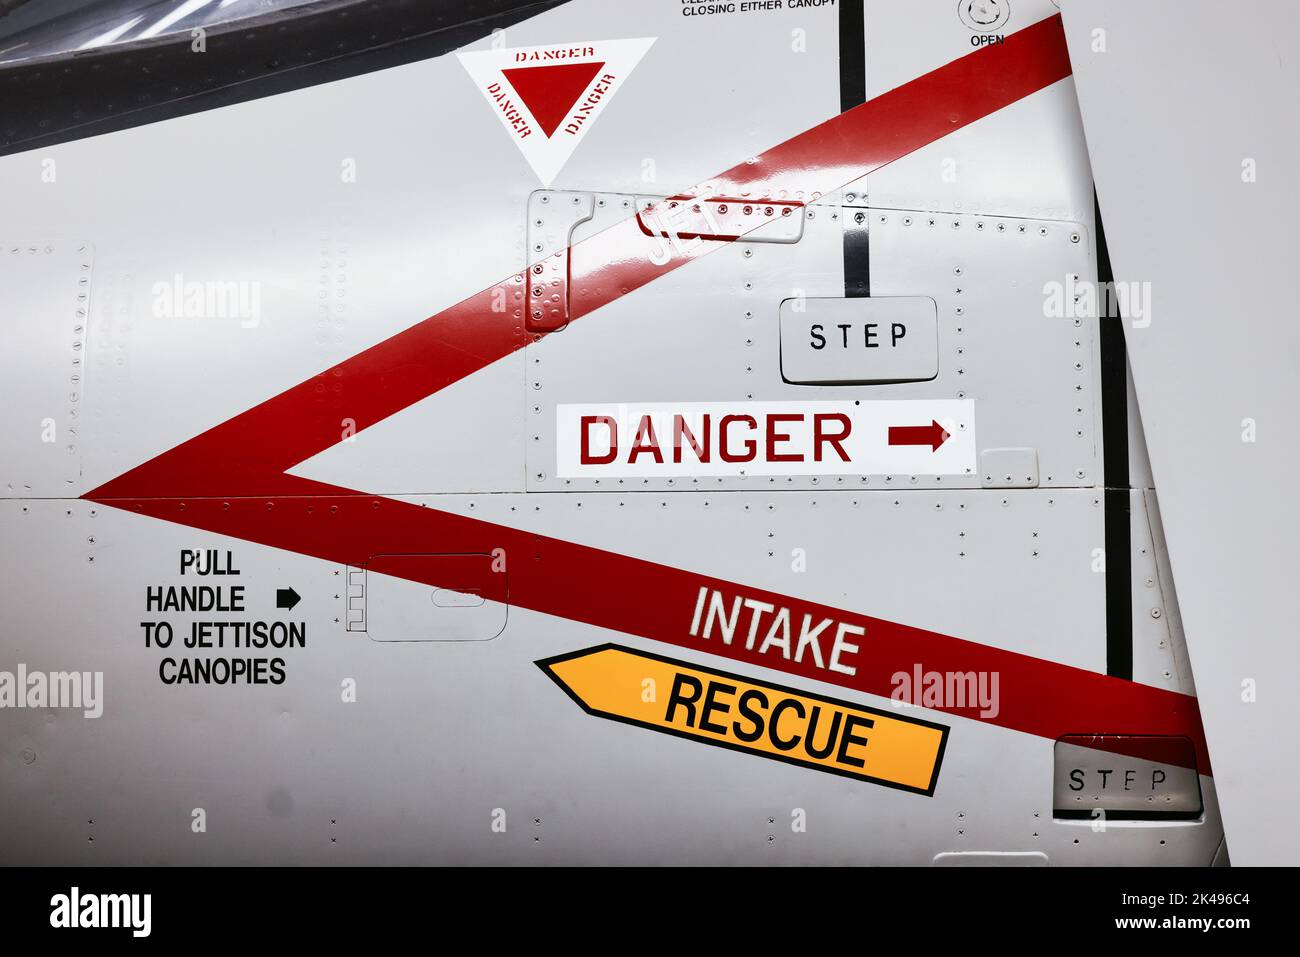 Danger aircraft jet ejector seat rescue and intake signs on side of modern military airforce plane. Stock Photo